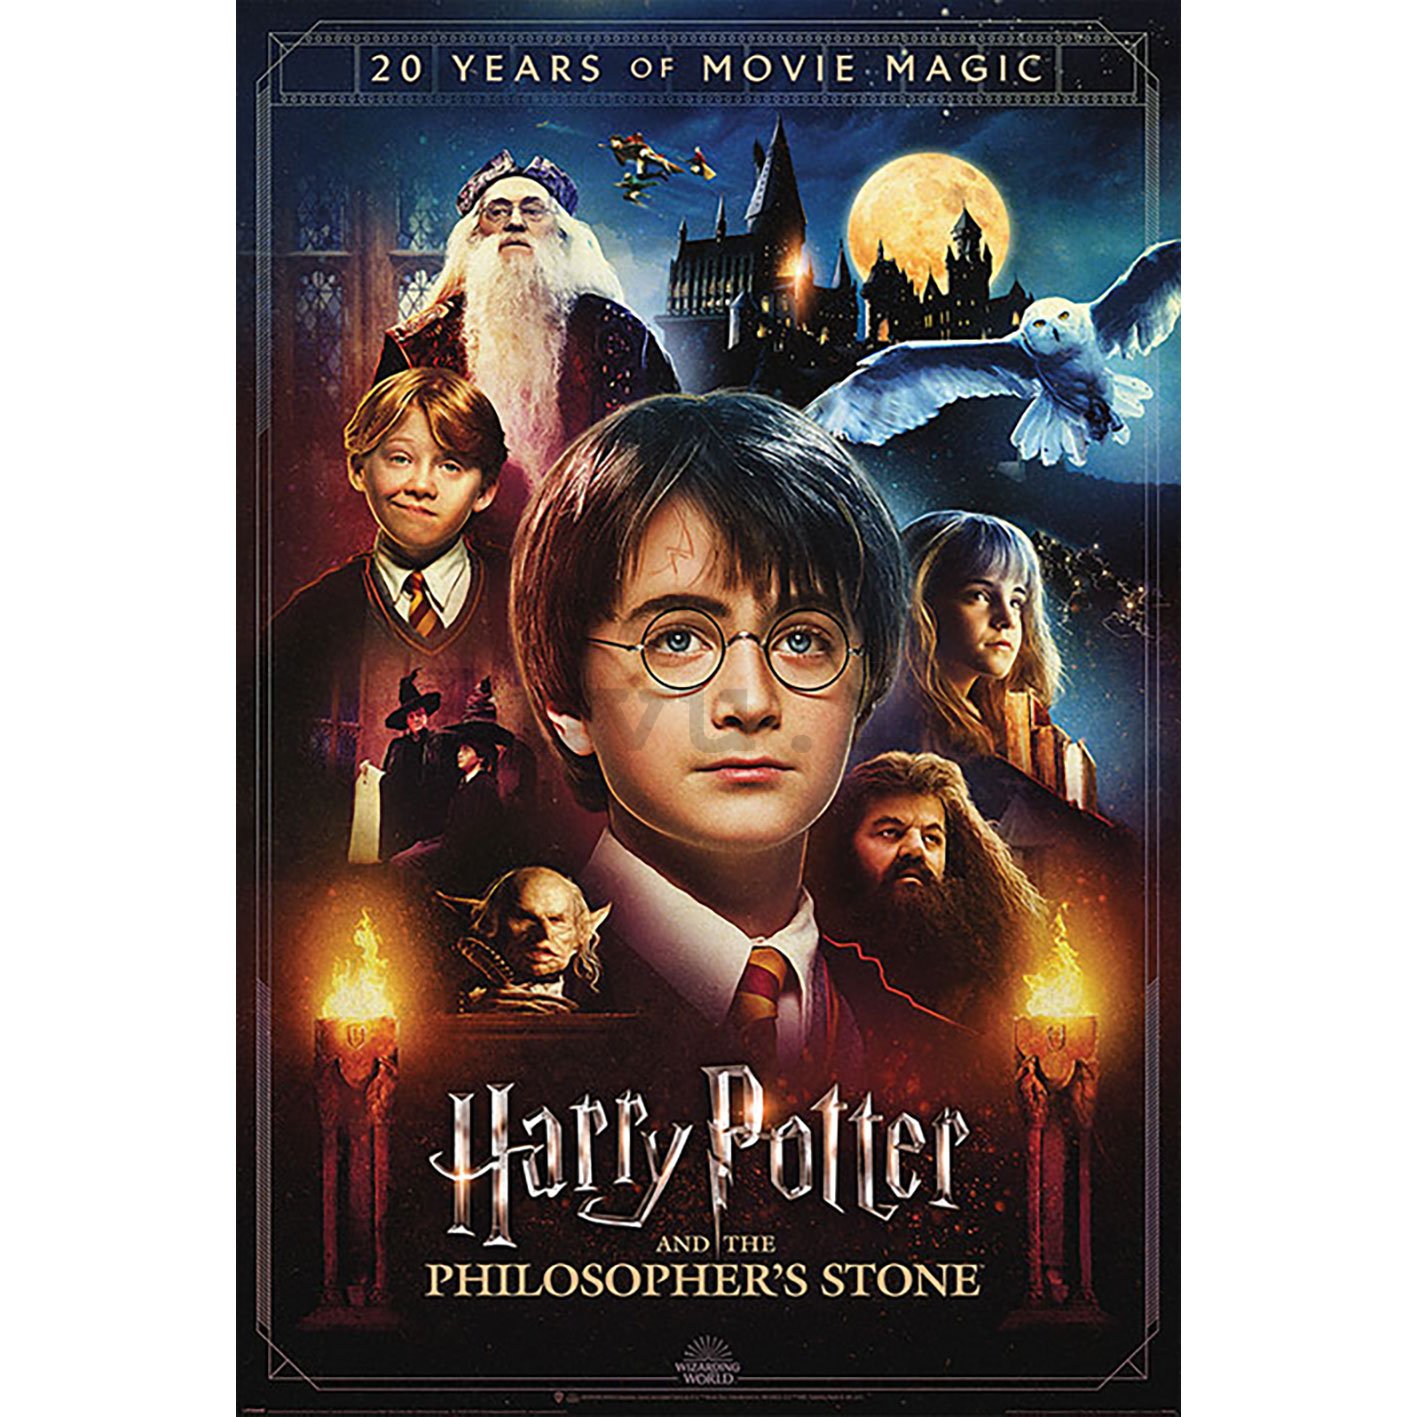 Poster - Harry Potter (20 Years of Movie Magic)